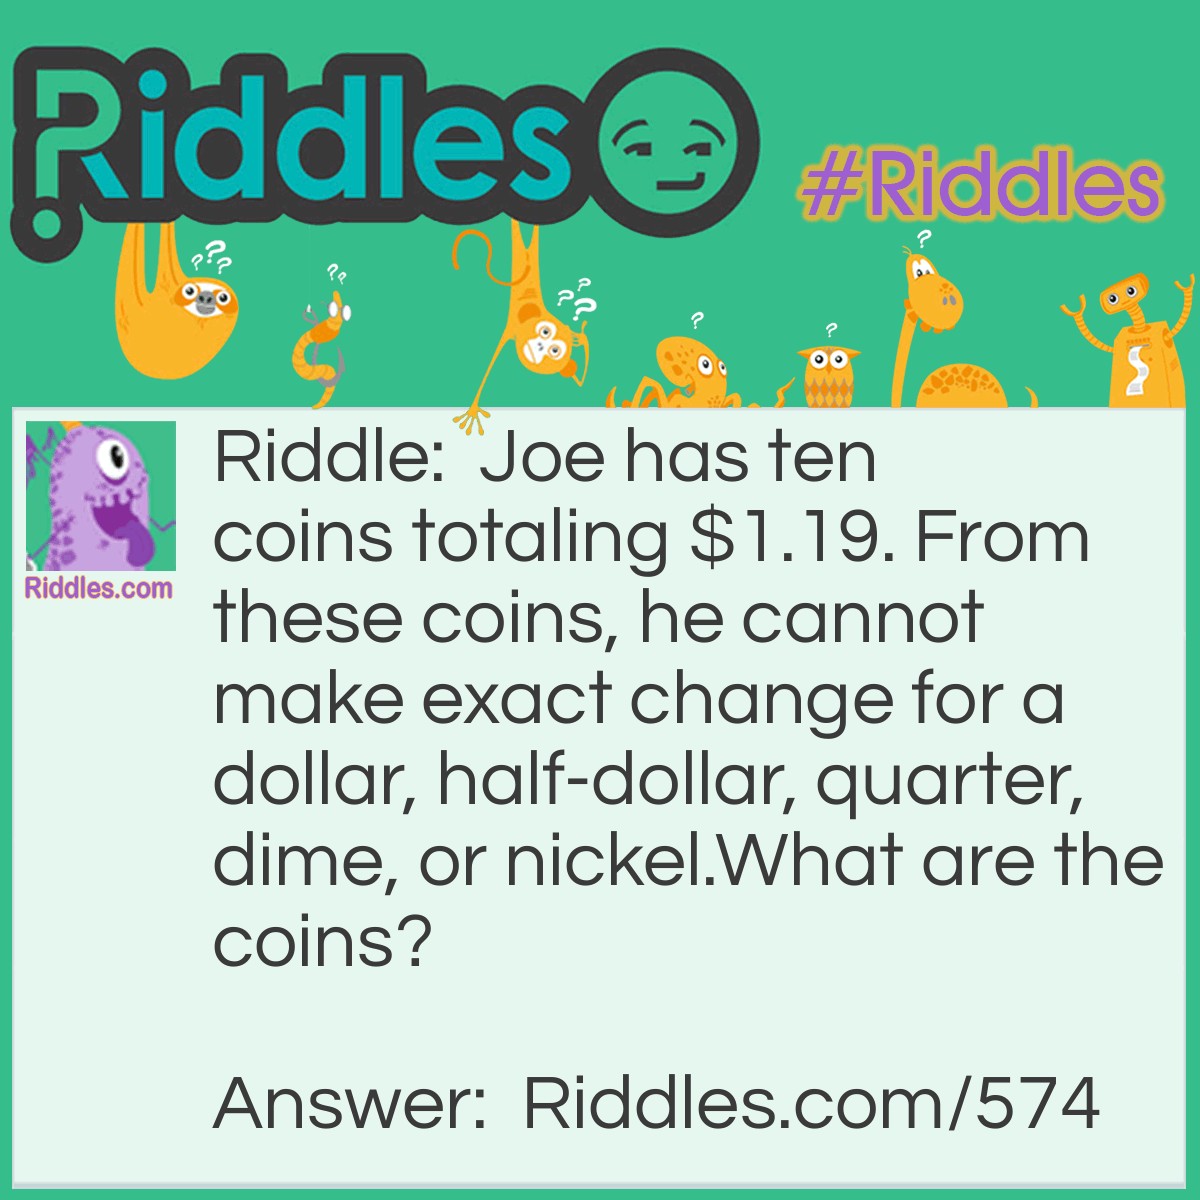 Riddle: Joe has ten coins totaling $1.19. From these coins, he cannot make exact change for a dollar, half-dollar, quarter, dime, or nickel.
What are the coins? Answer: A half-dollar, a quarter, four dimes, and four pennies.